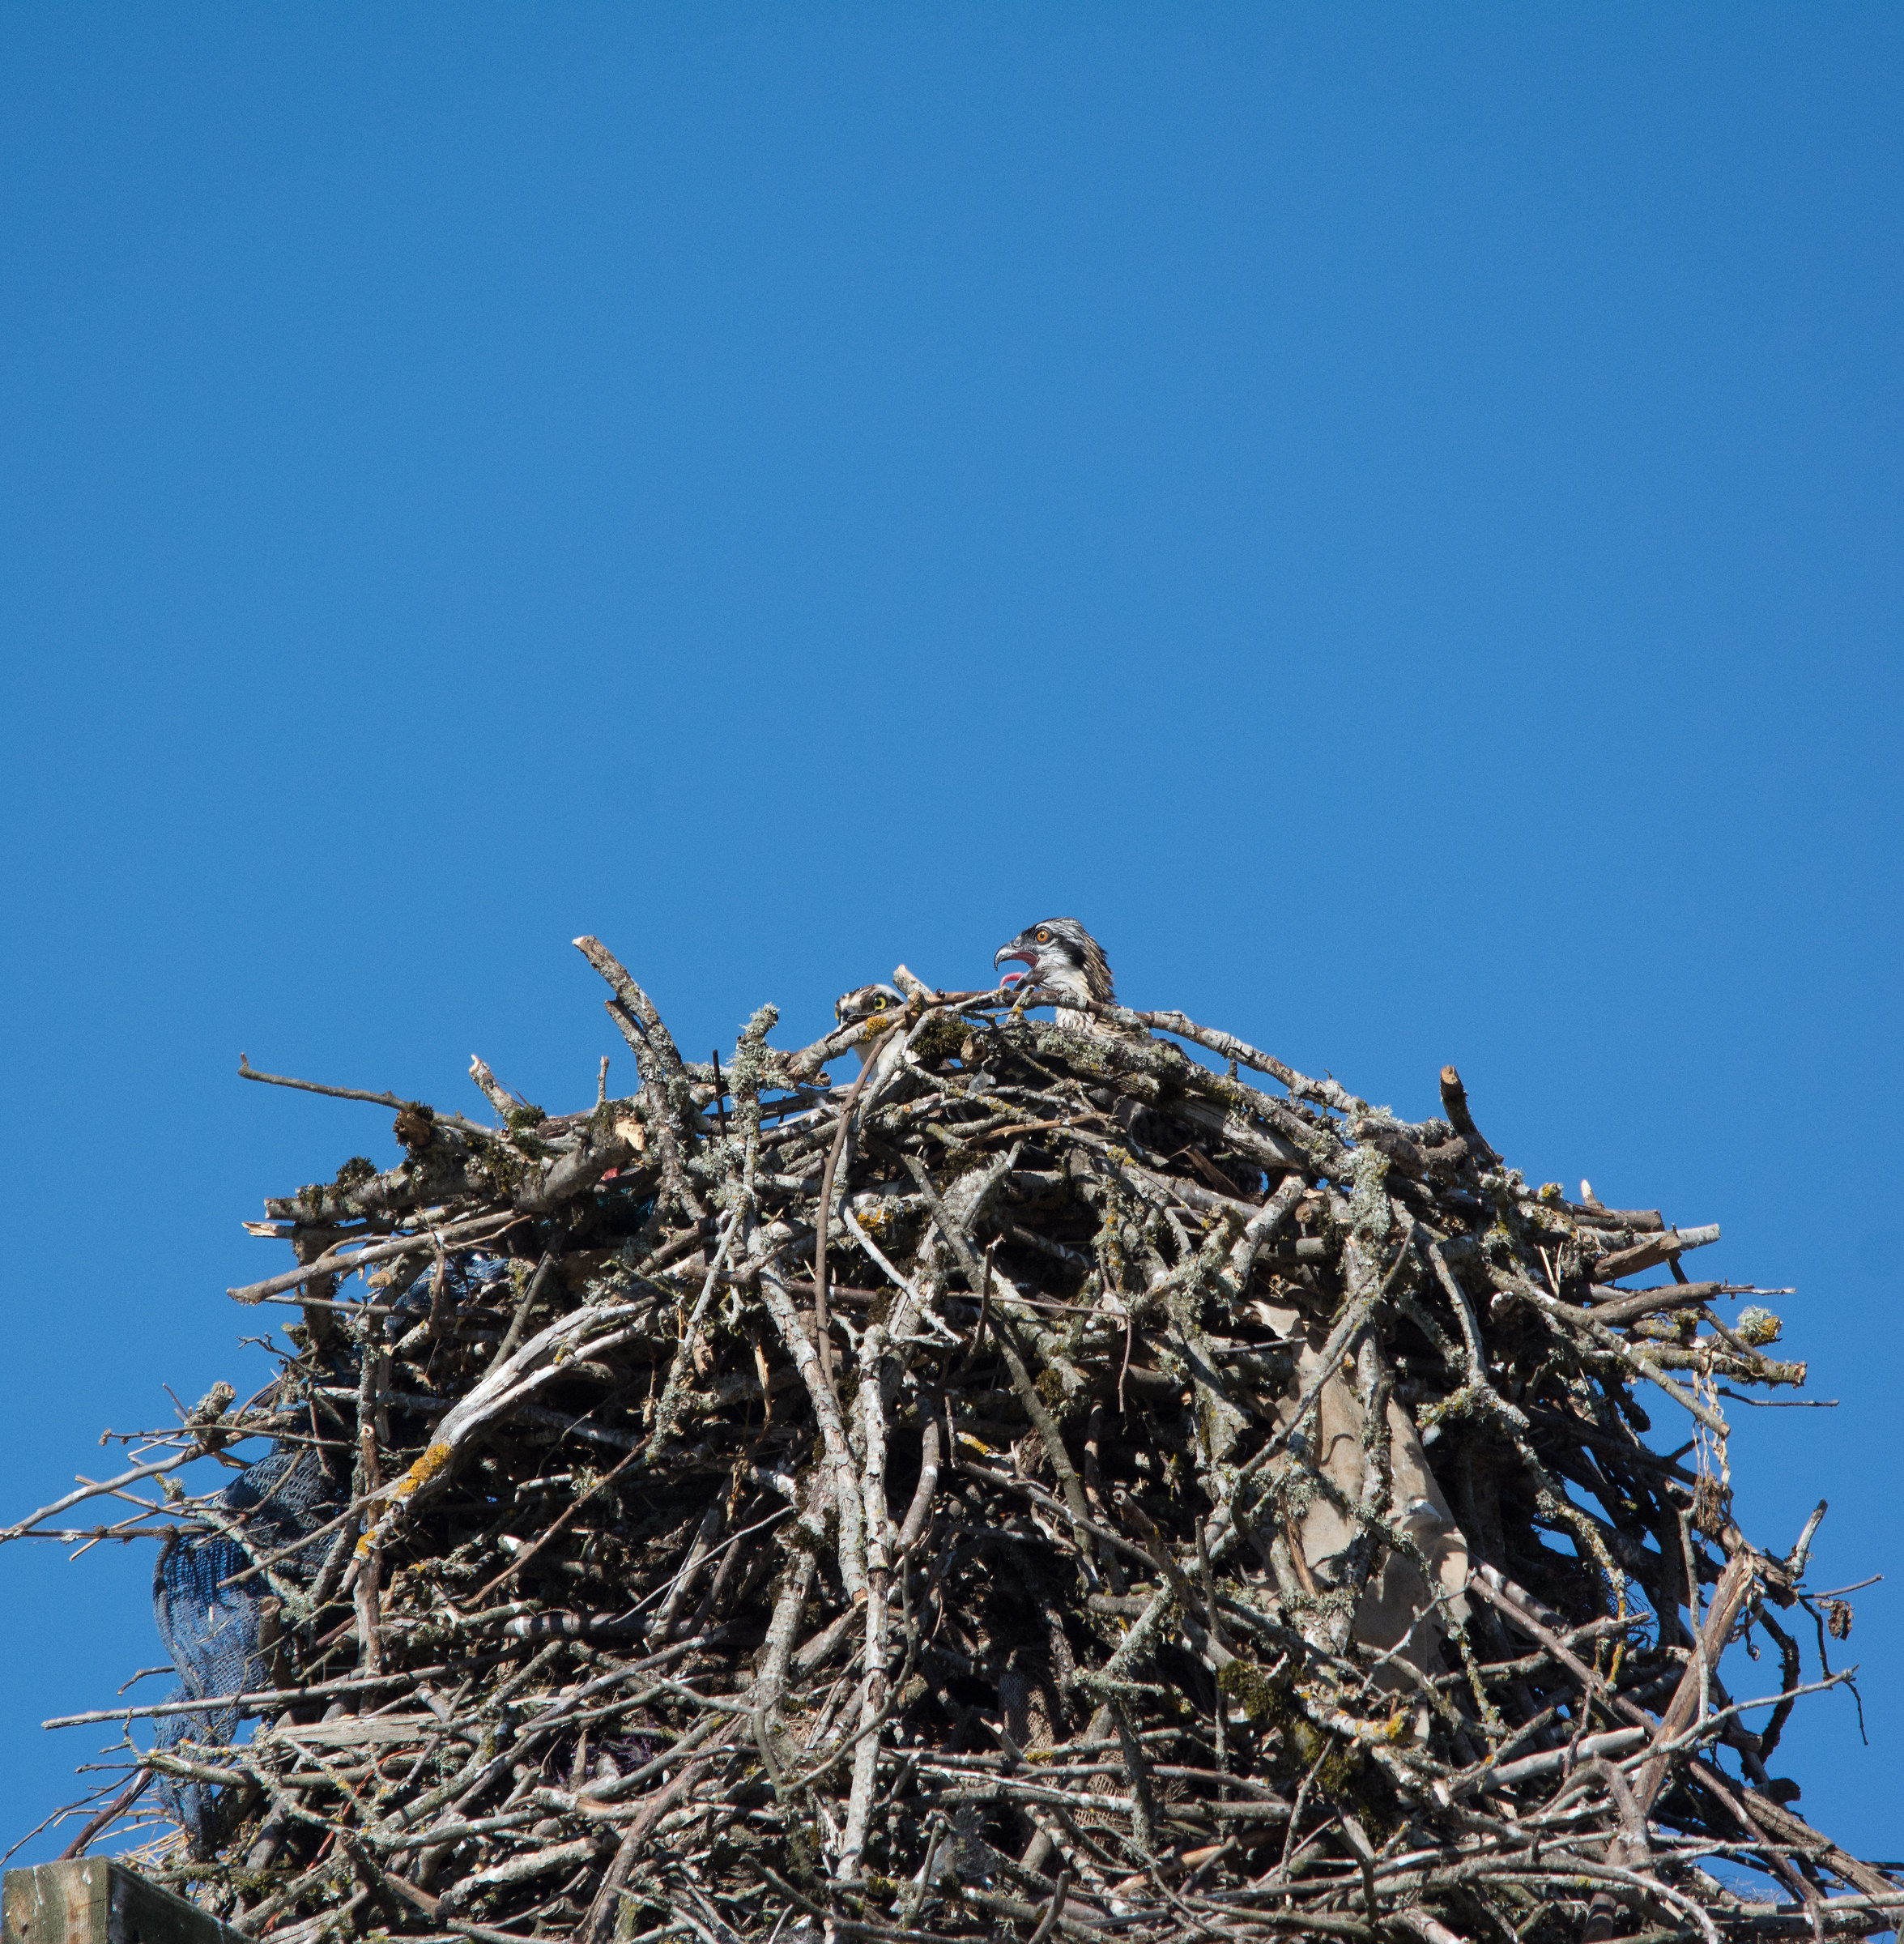 Baby ospreys are hatched and checking out the world!...